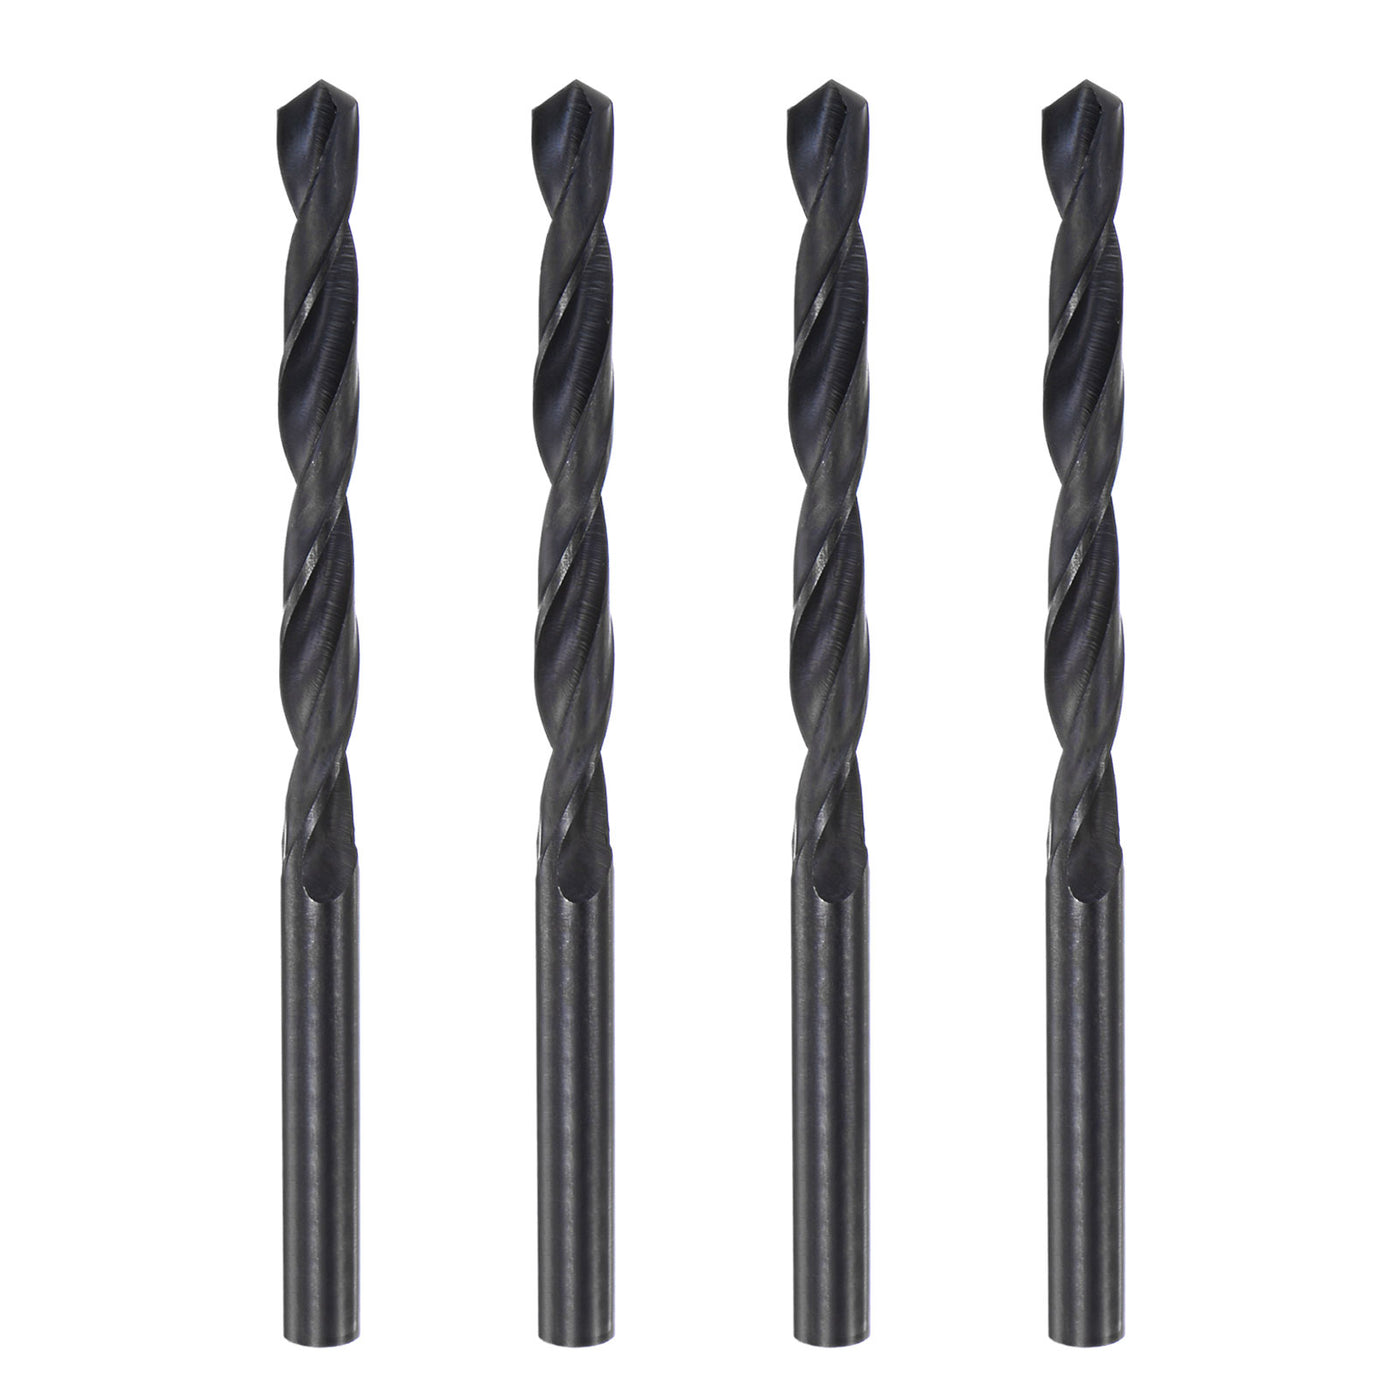 uxcell Uxcell High Speed Steel Twist Drill Bit, 6.8mm Fully Ground Black Oxide 110mm Long 4Pcs